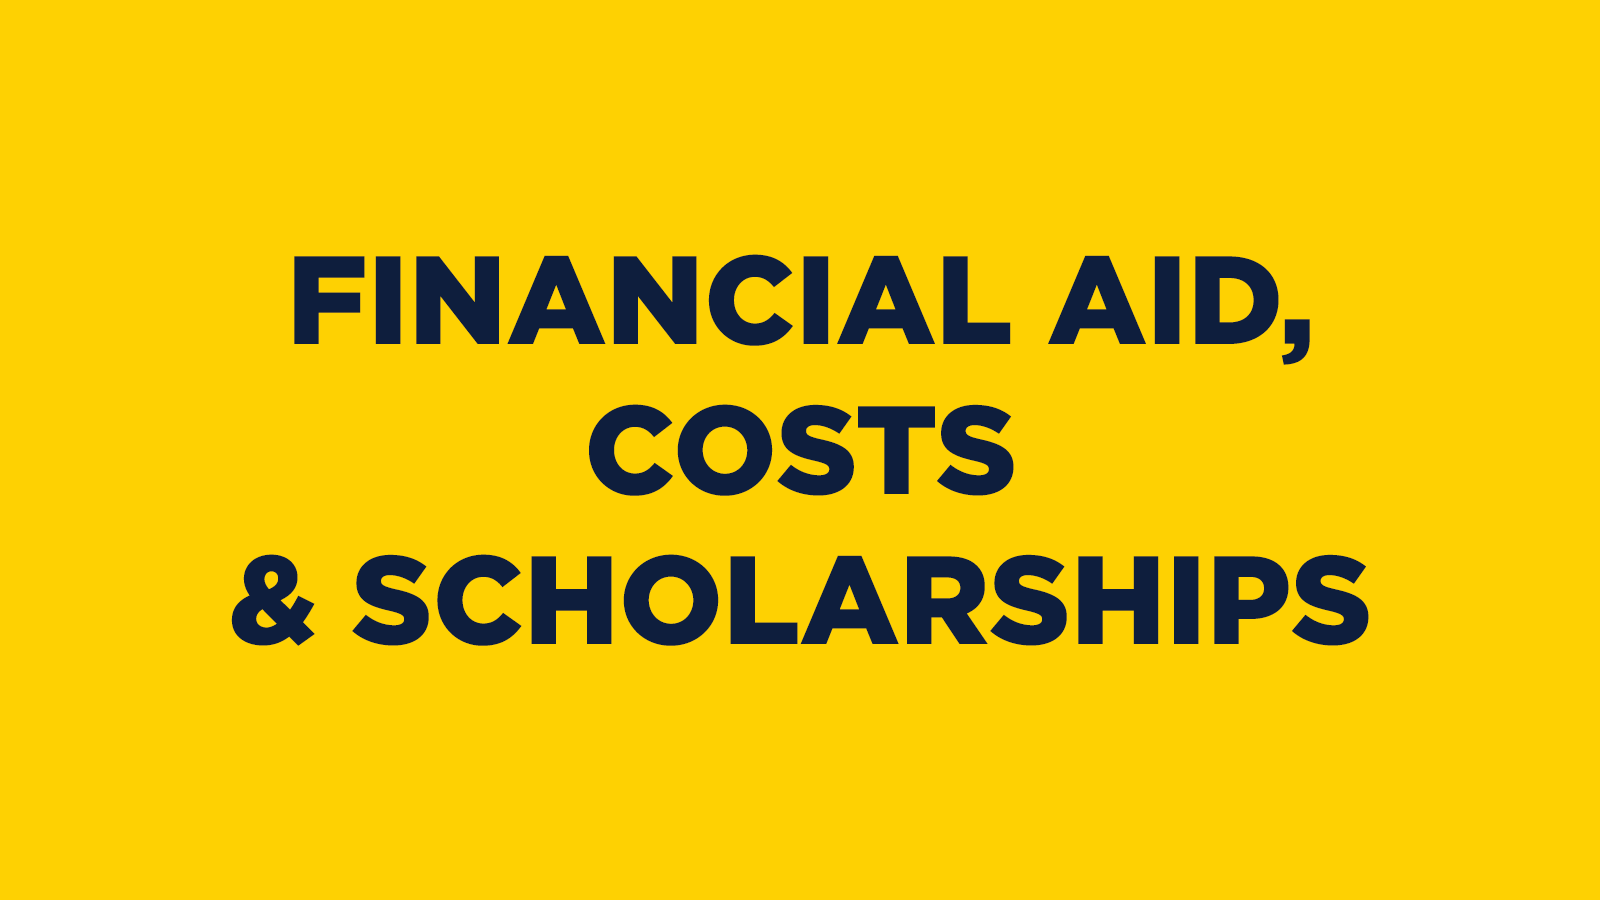 Financial Aid, Costs & Scholarships